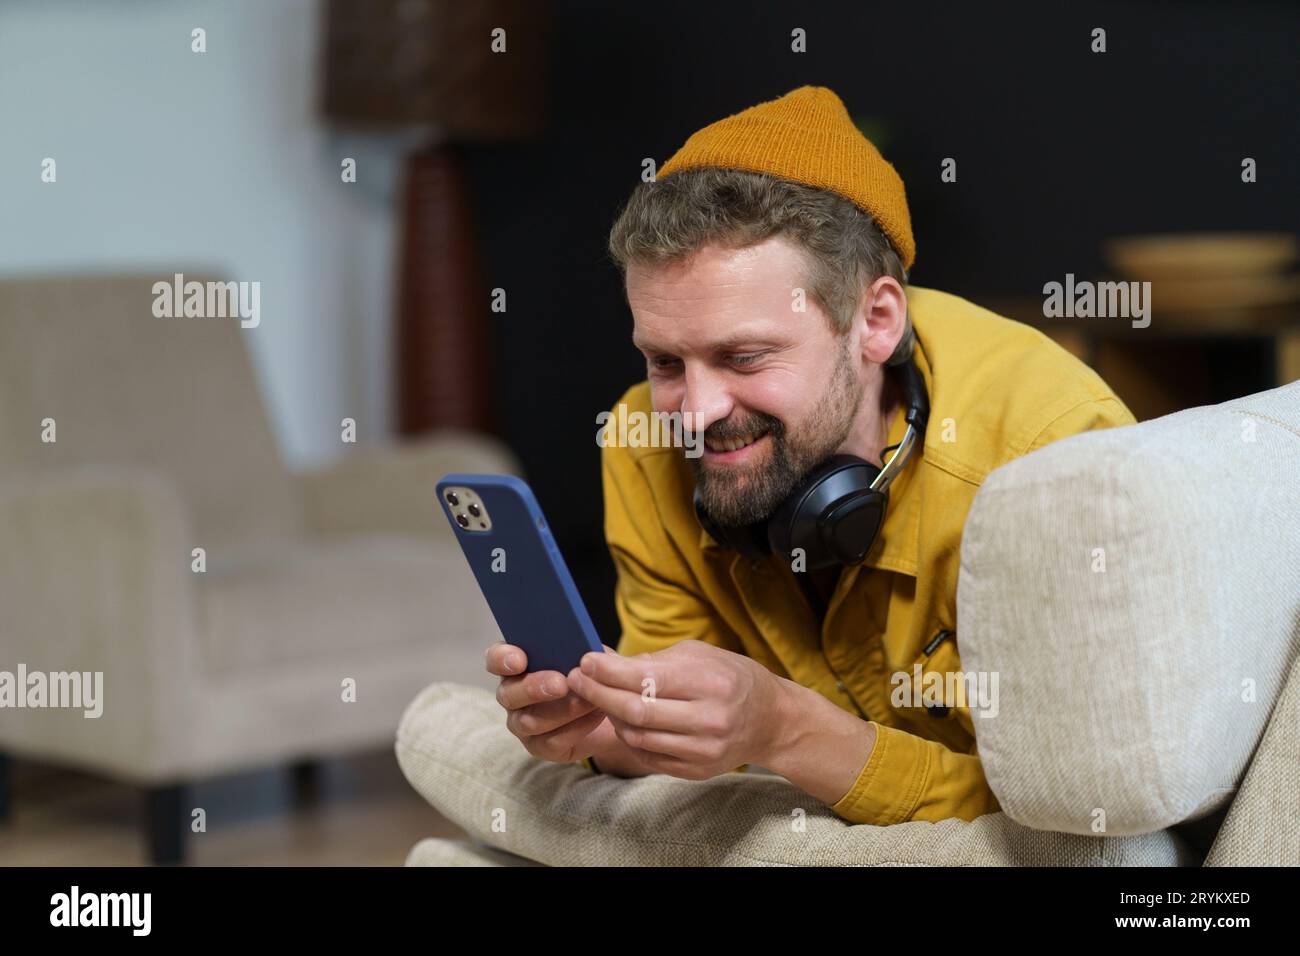 Man in casual spending his leisure time home on sofa, engrossed in phone. He texting someone using messaging app, indicating act Stock Photo